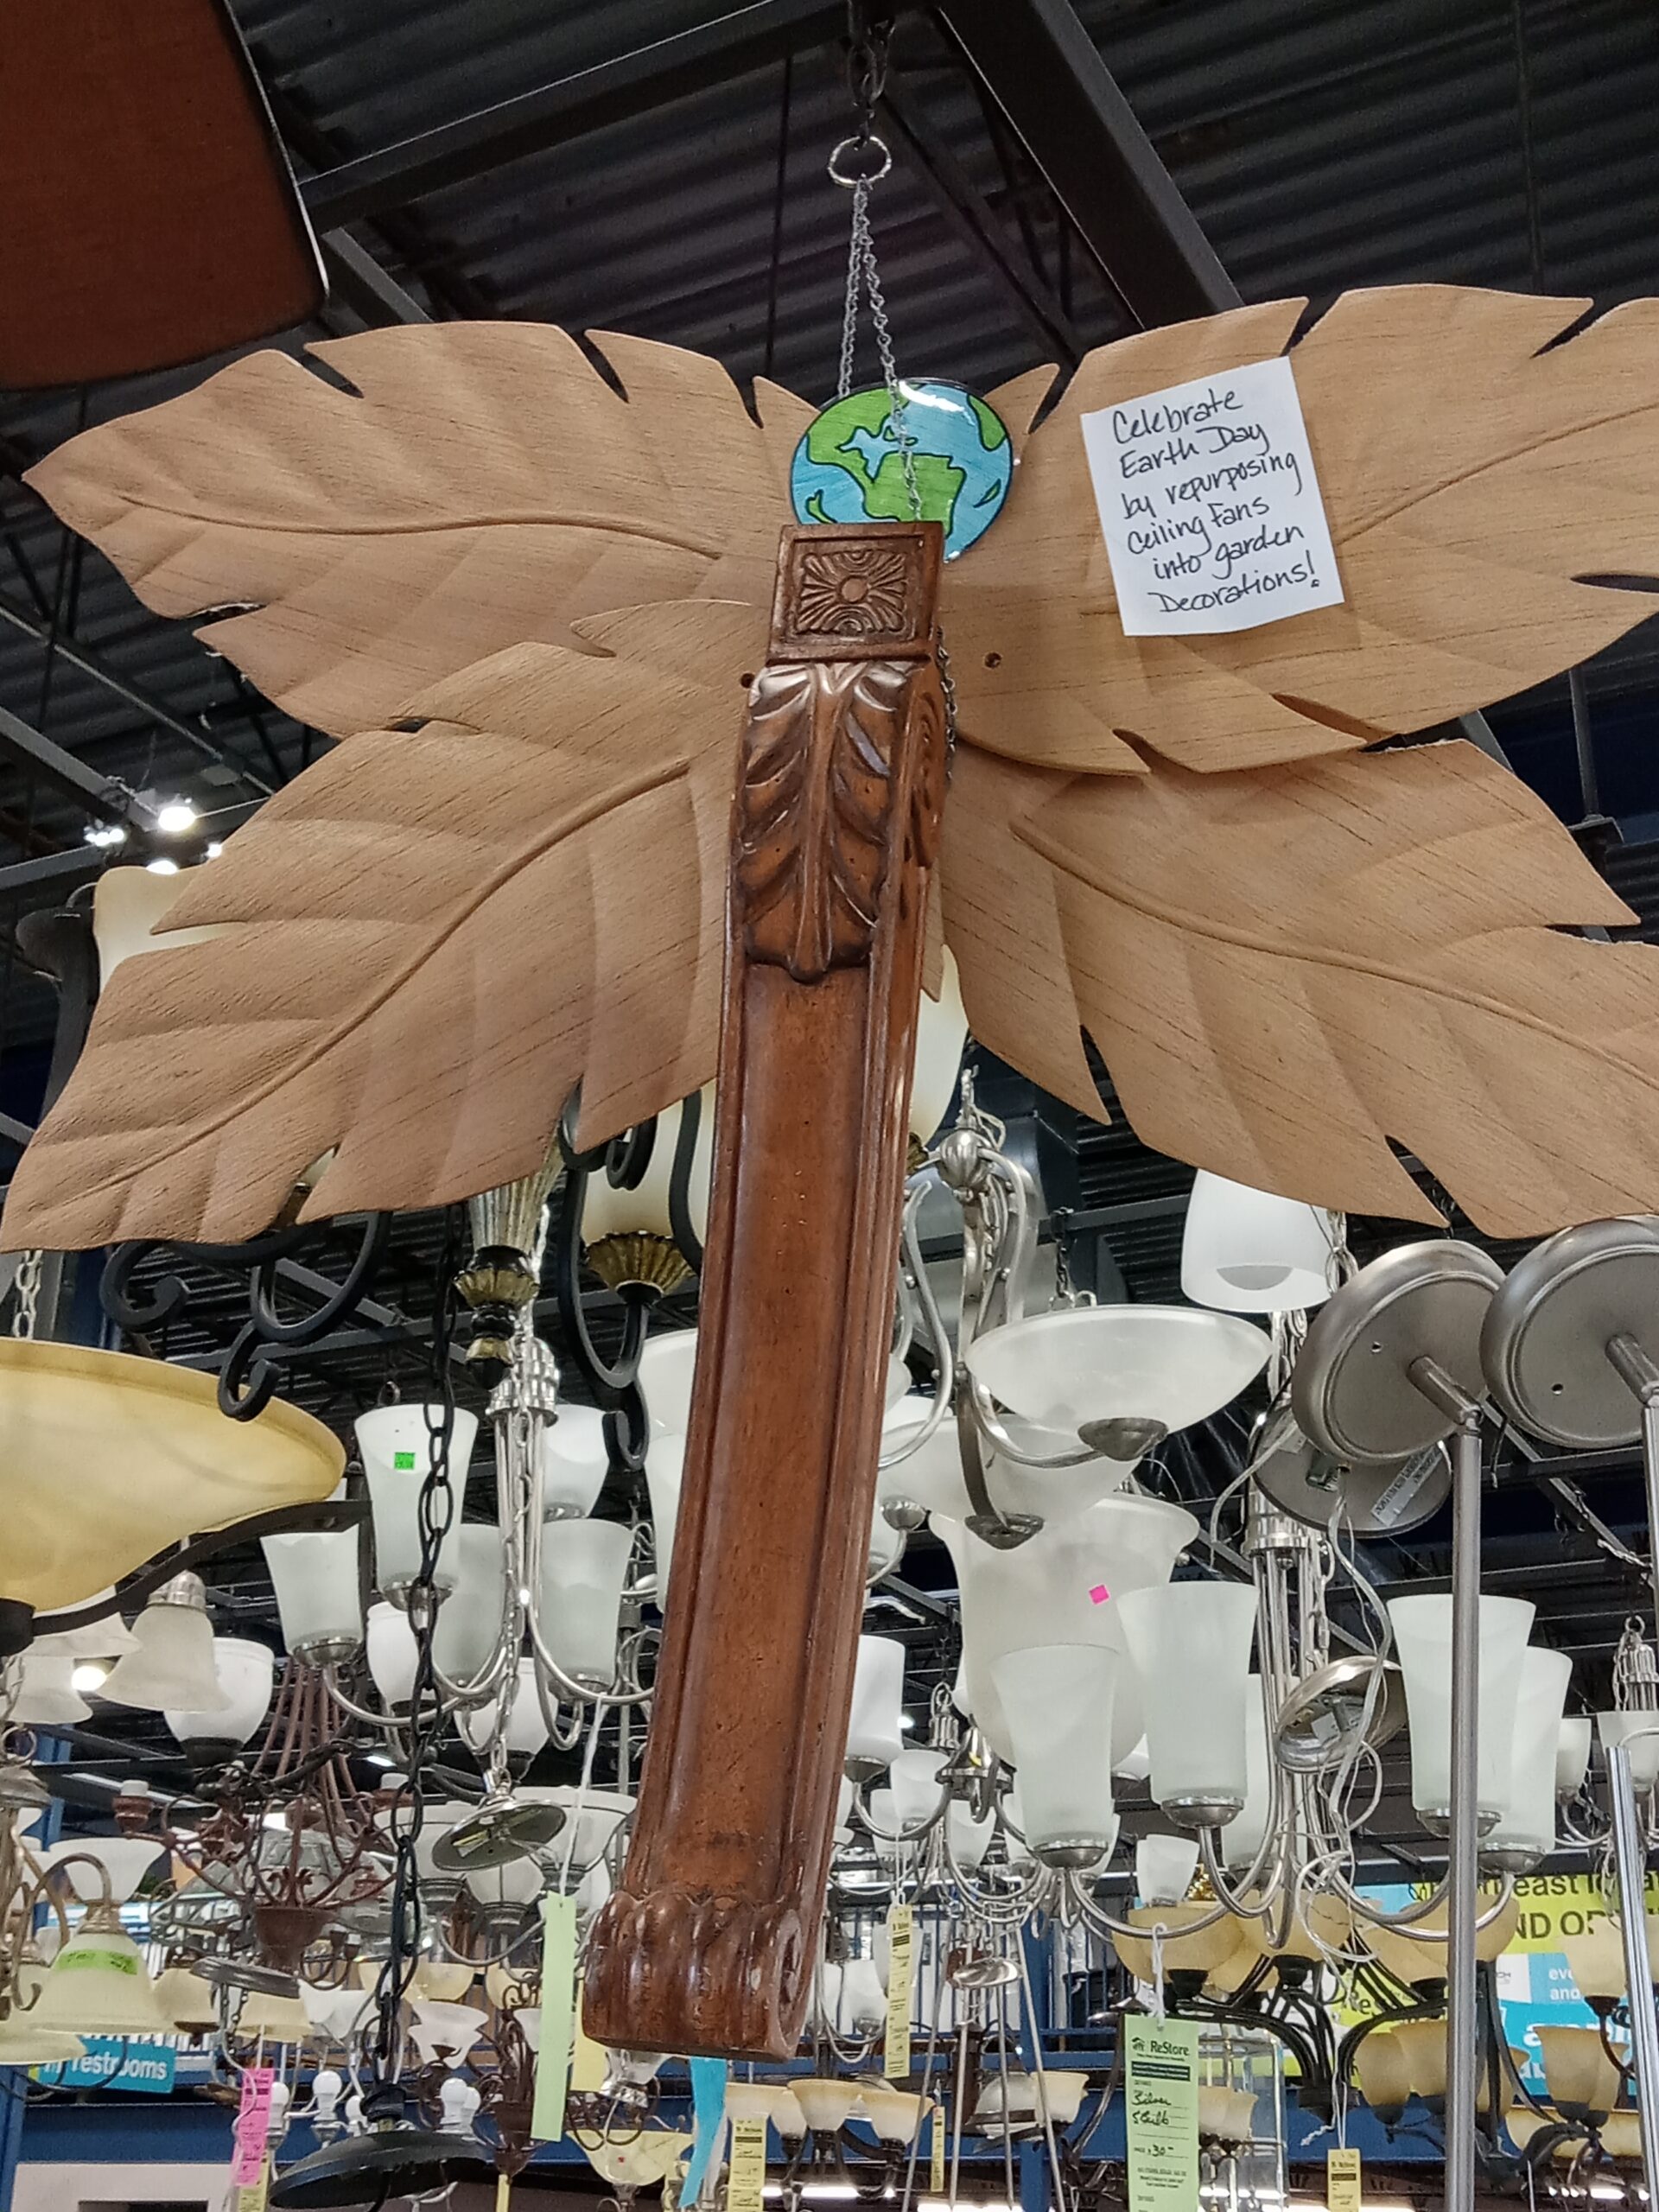 Dragonfly made from ceiling fan blades and table leg